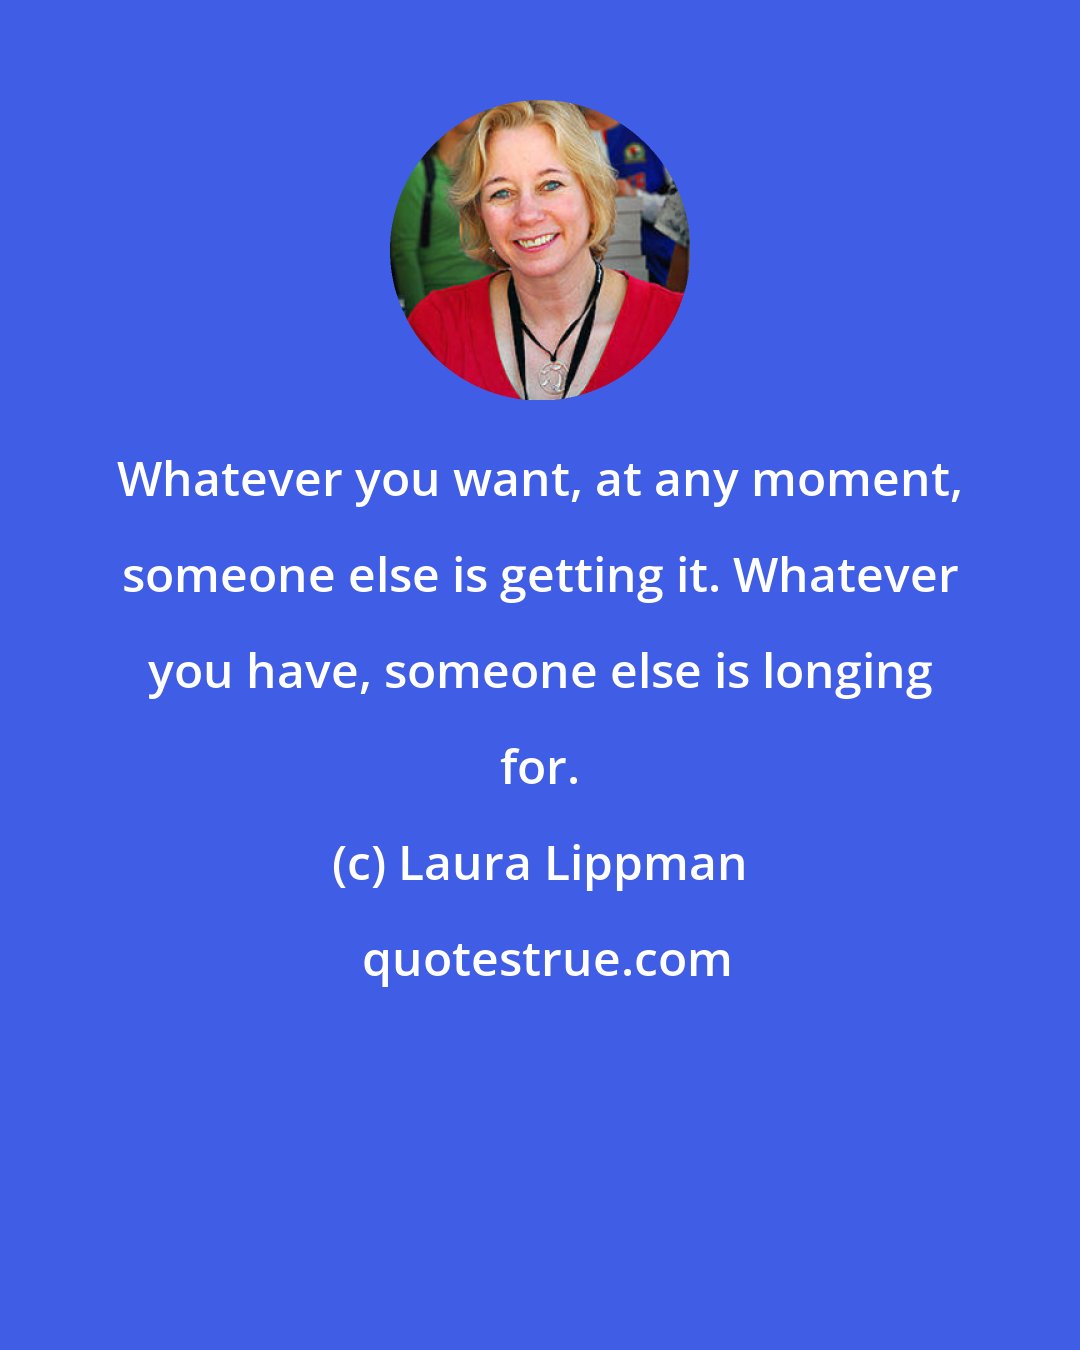 Laura Lippman: Whatever you want, at any moment, someone else is getting it. Whatever you have, someone else is longing for.